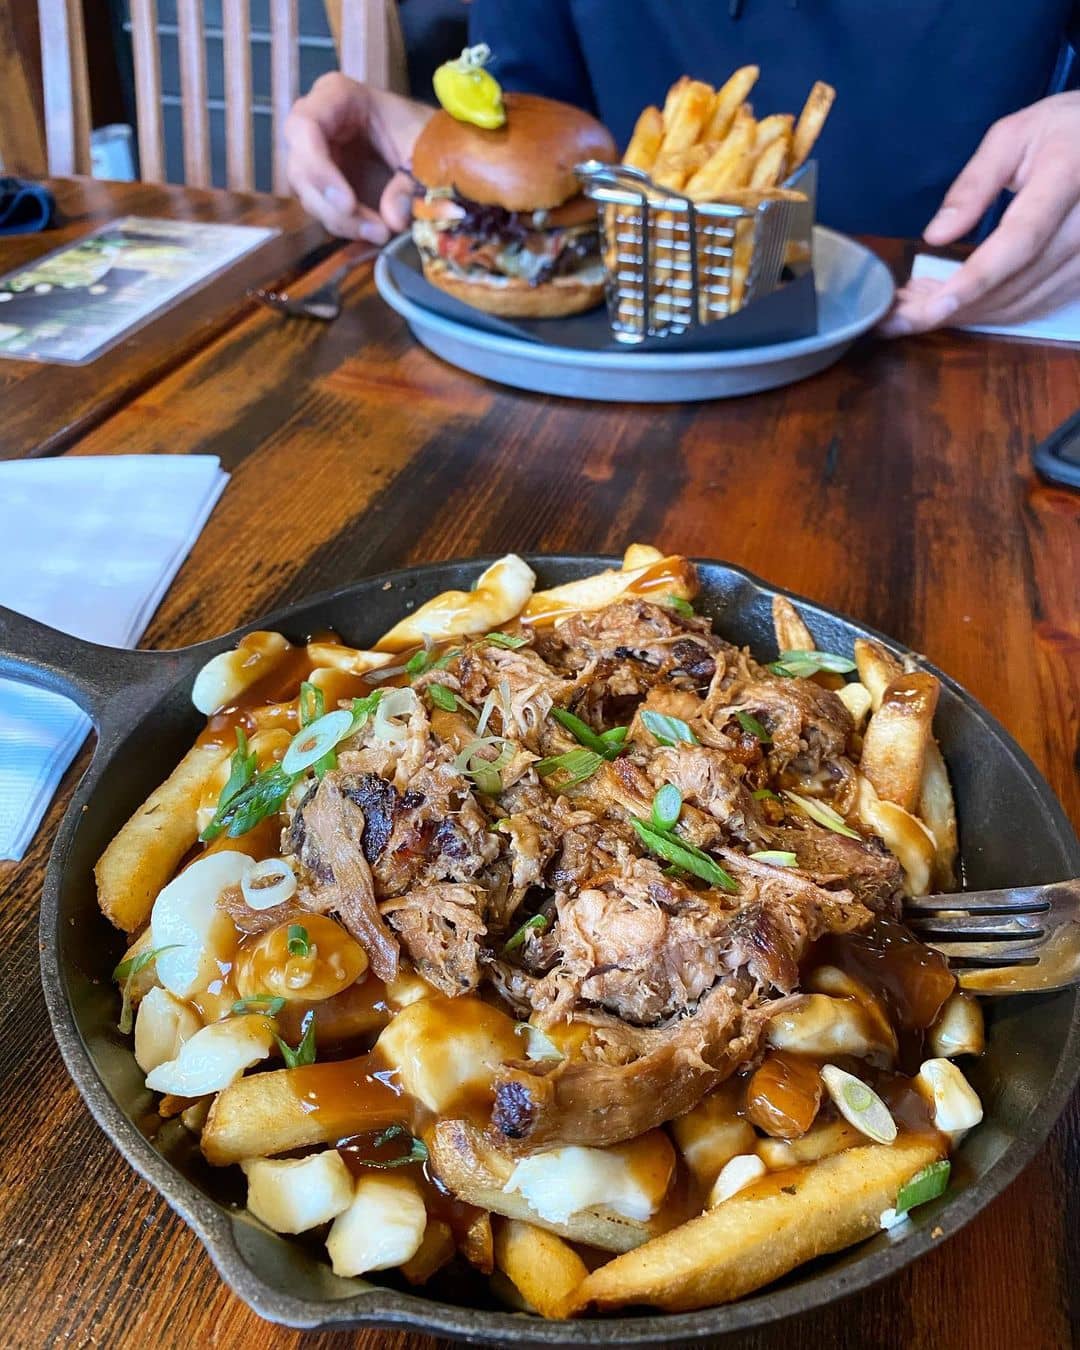 best squamish restaurants - copper coil still poutine in skillet on table